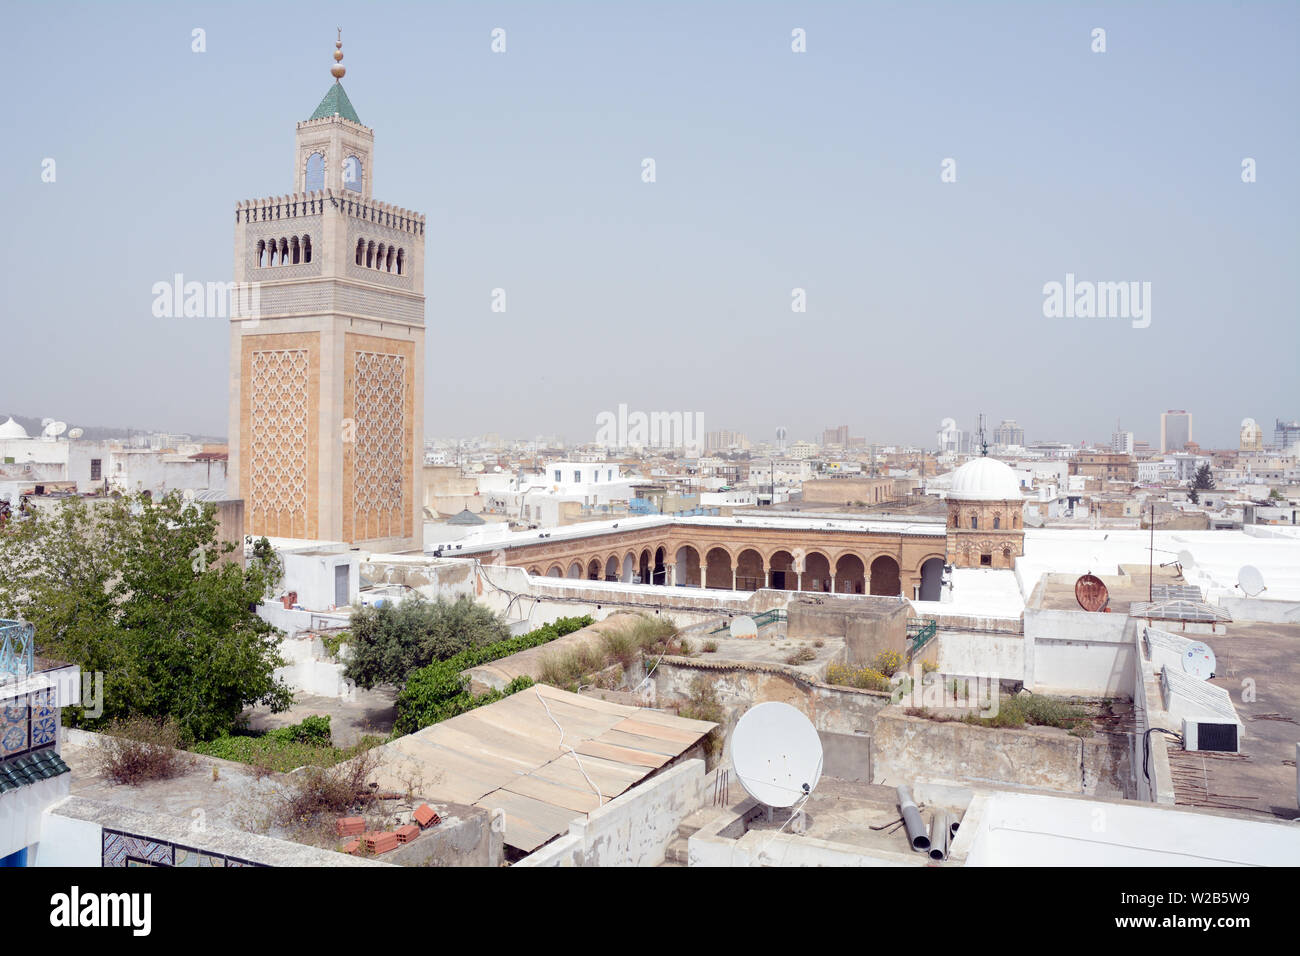 A rooftop view of the Tunis old city and medina overlooking the Zeitoun mosque and its square minaret, Tunisia. Stock Photo